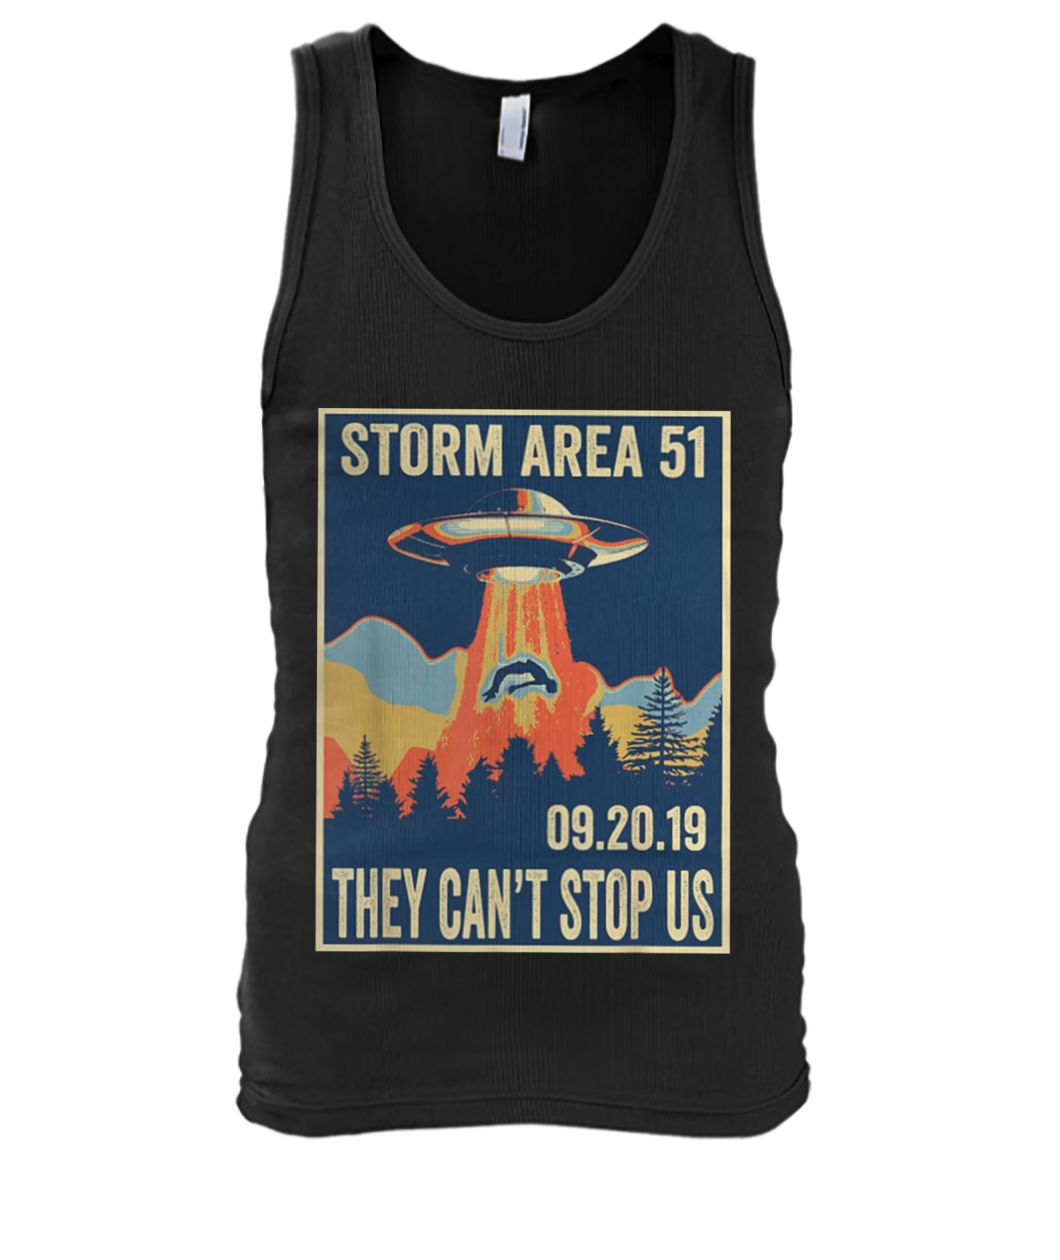 Storm area 51 alien ufo they can't stop us vintage poster men's tank top